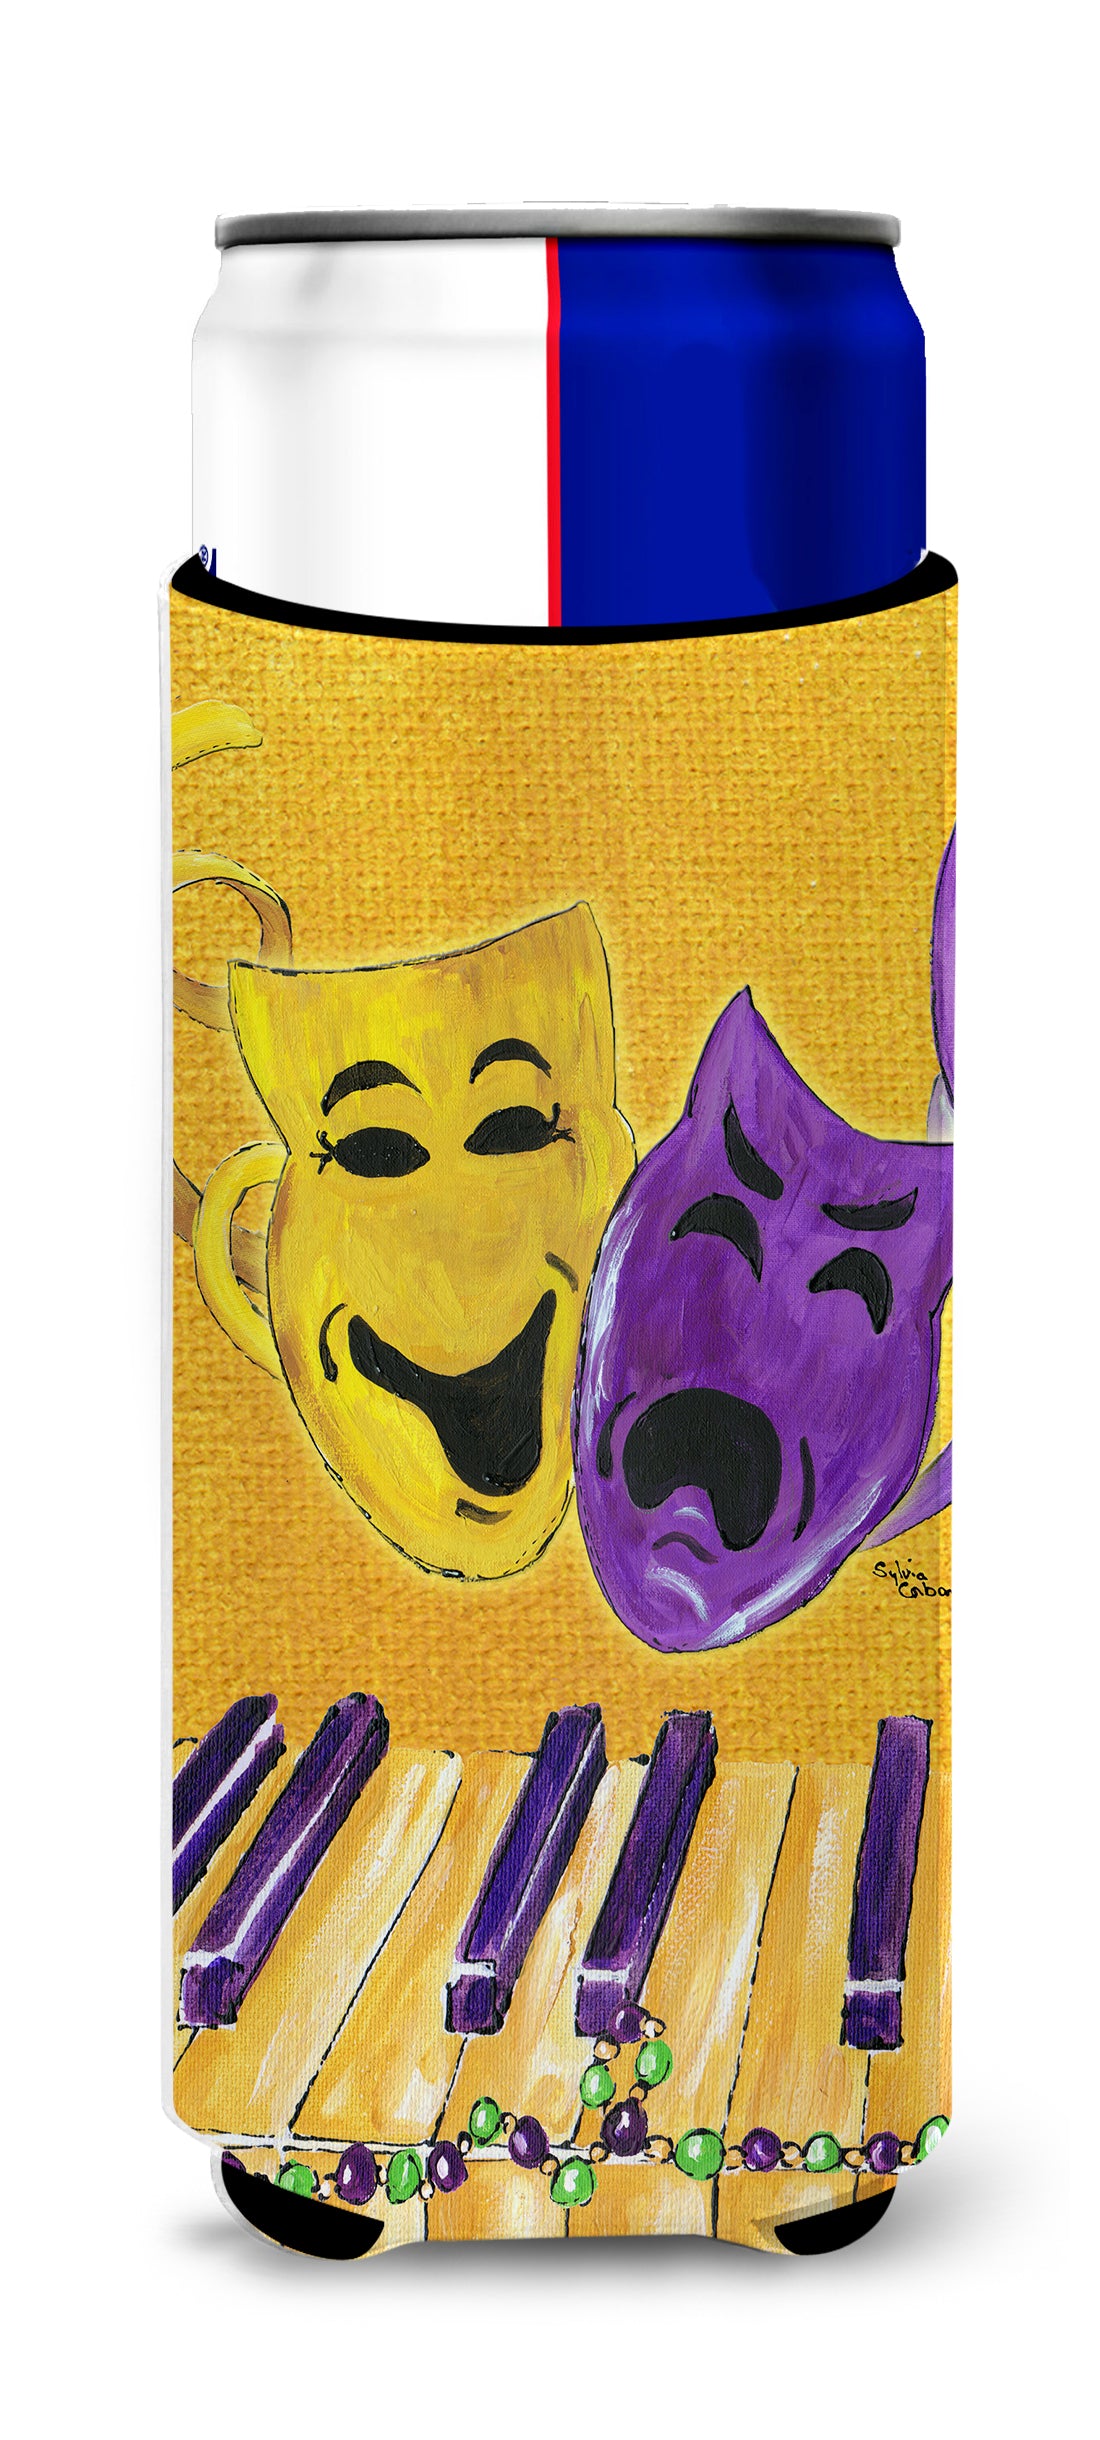 Mardi Gras Piano with Comedy and Tragedy Masks Ultra Beverage Insulators for slim cans 8367MUK.